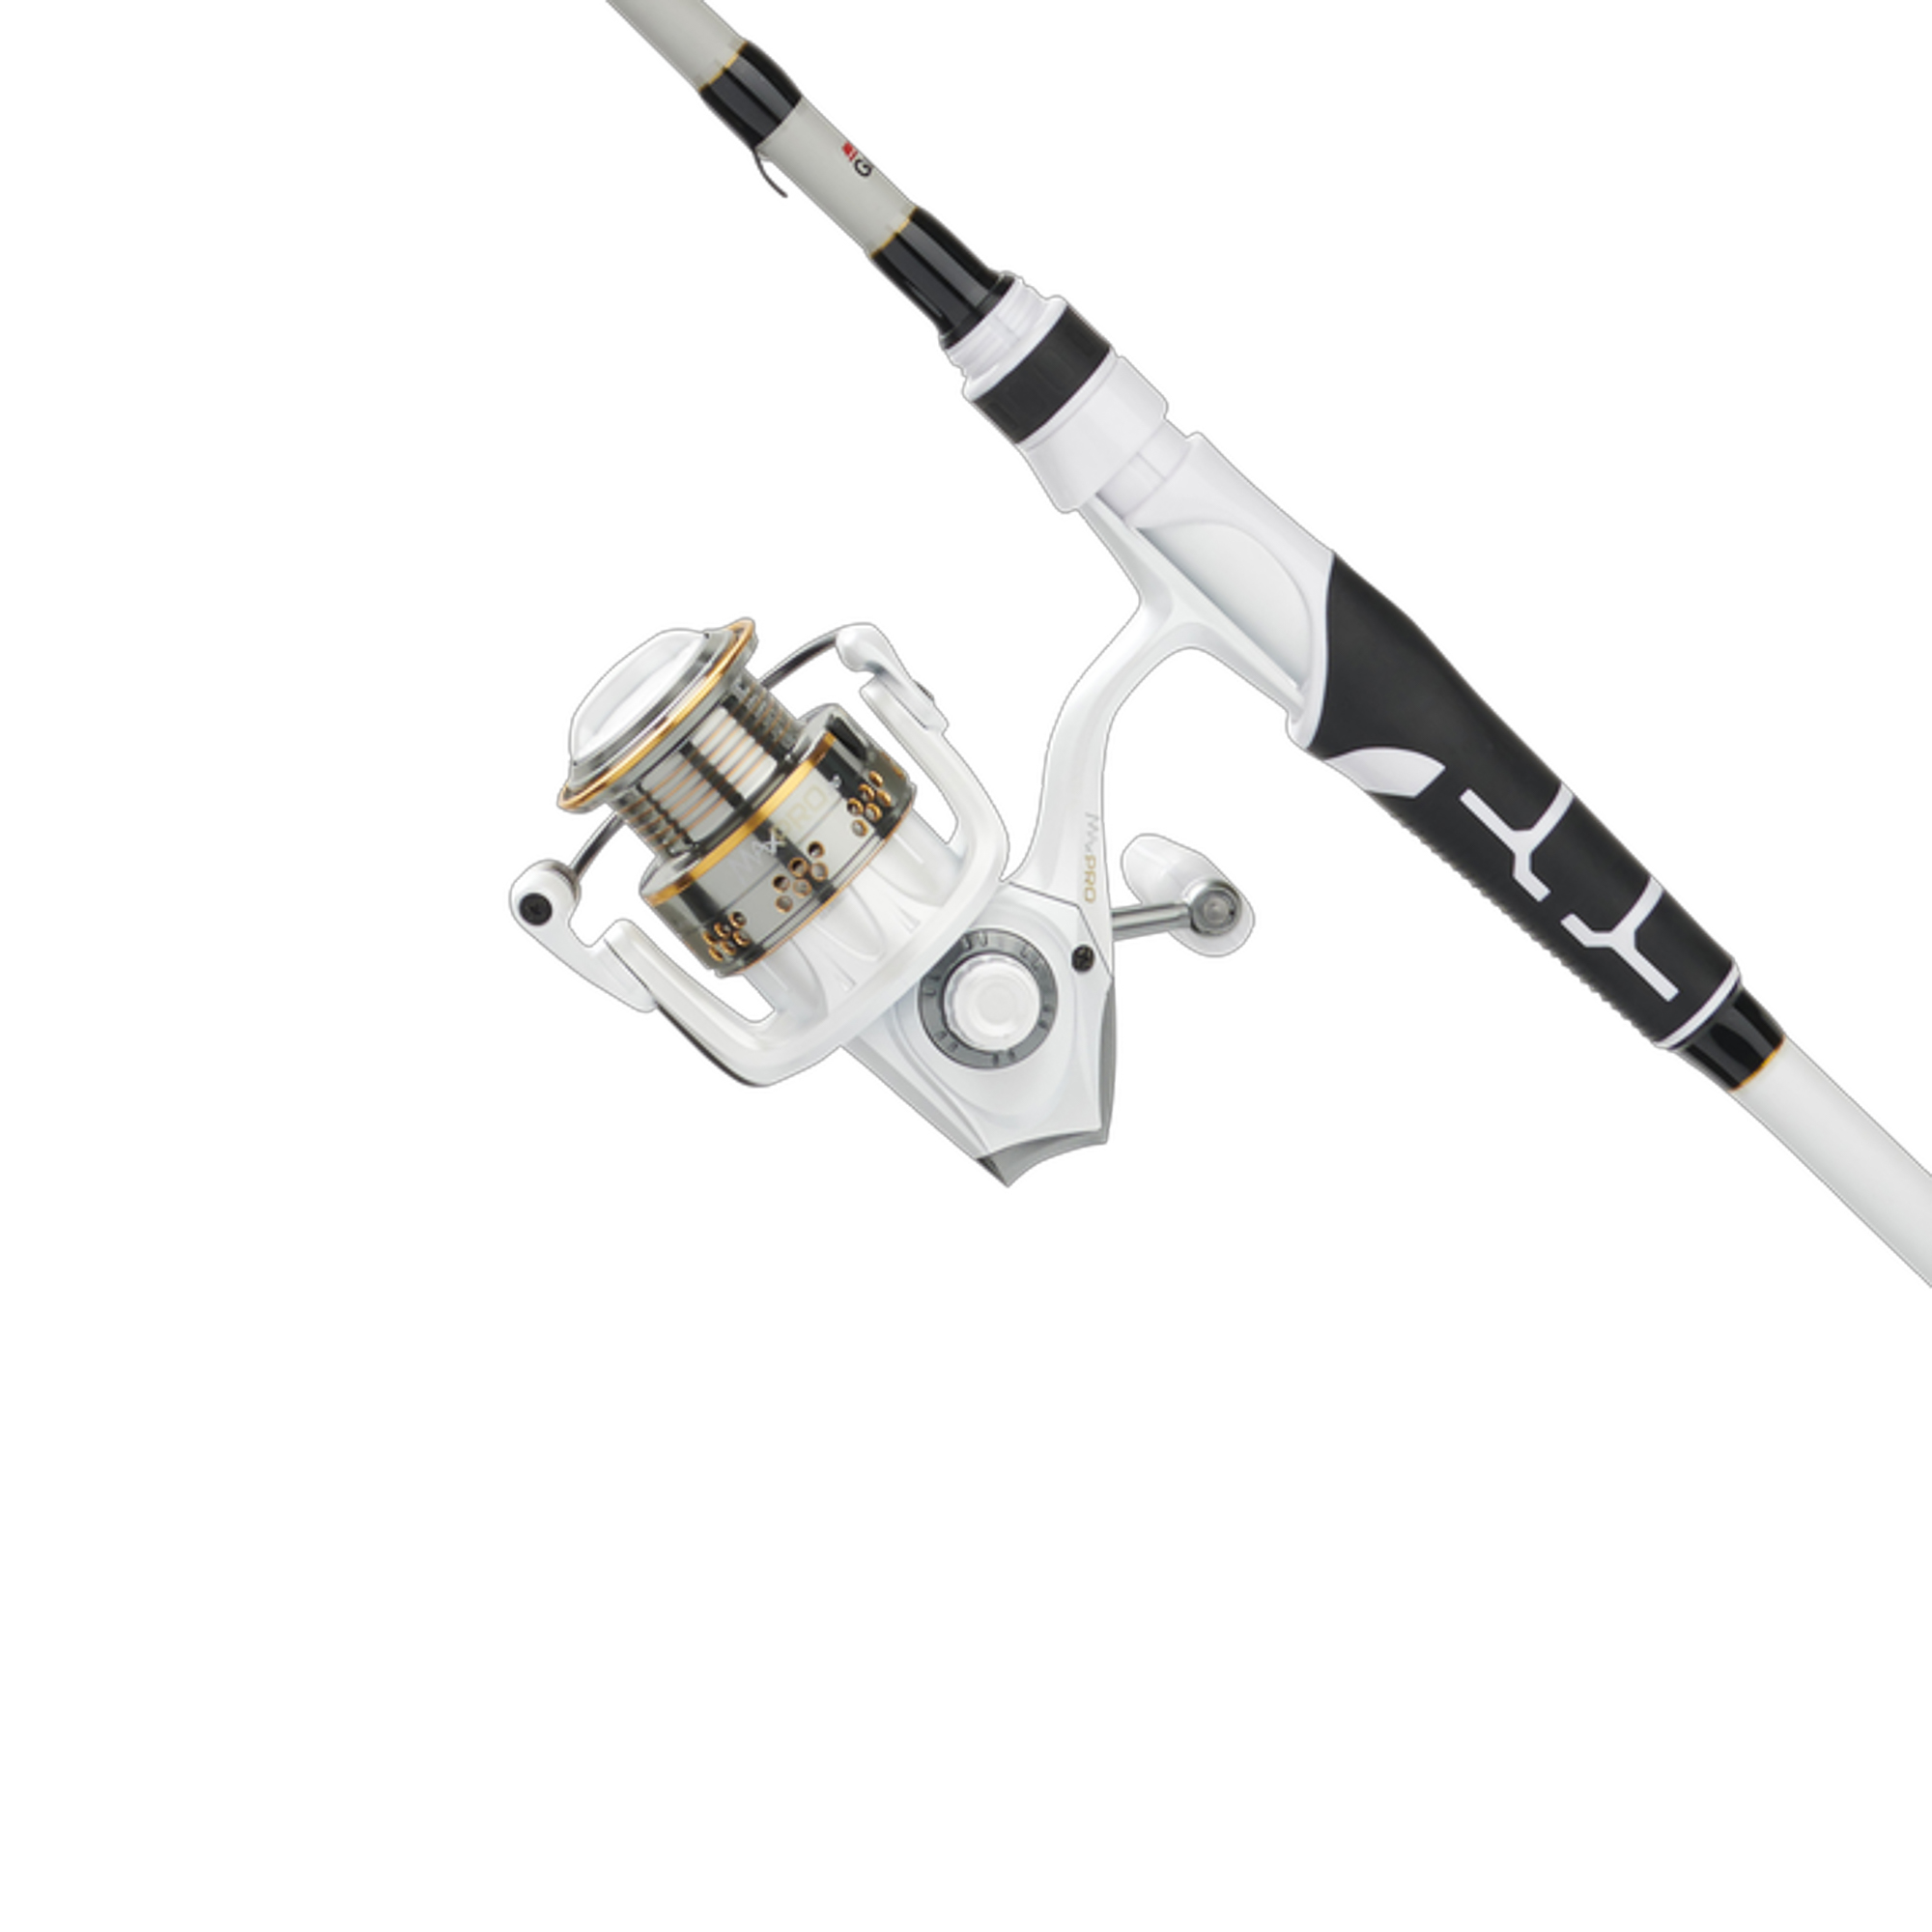 Abu Garcia Max Pro Spinning Rod and Reel Combo with Berkley Flicker Shad Bait Kit - image 4 of 6